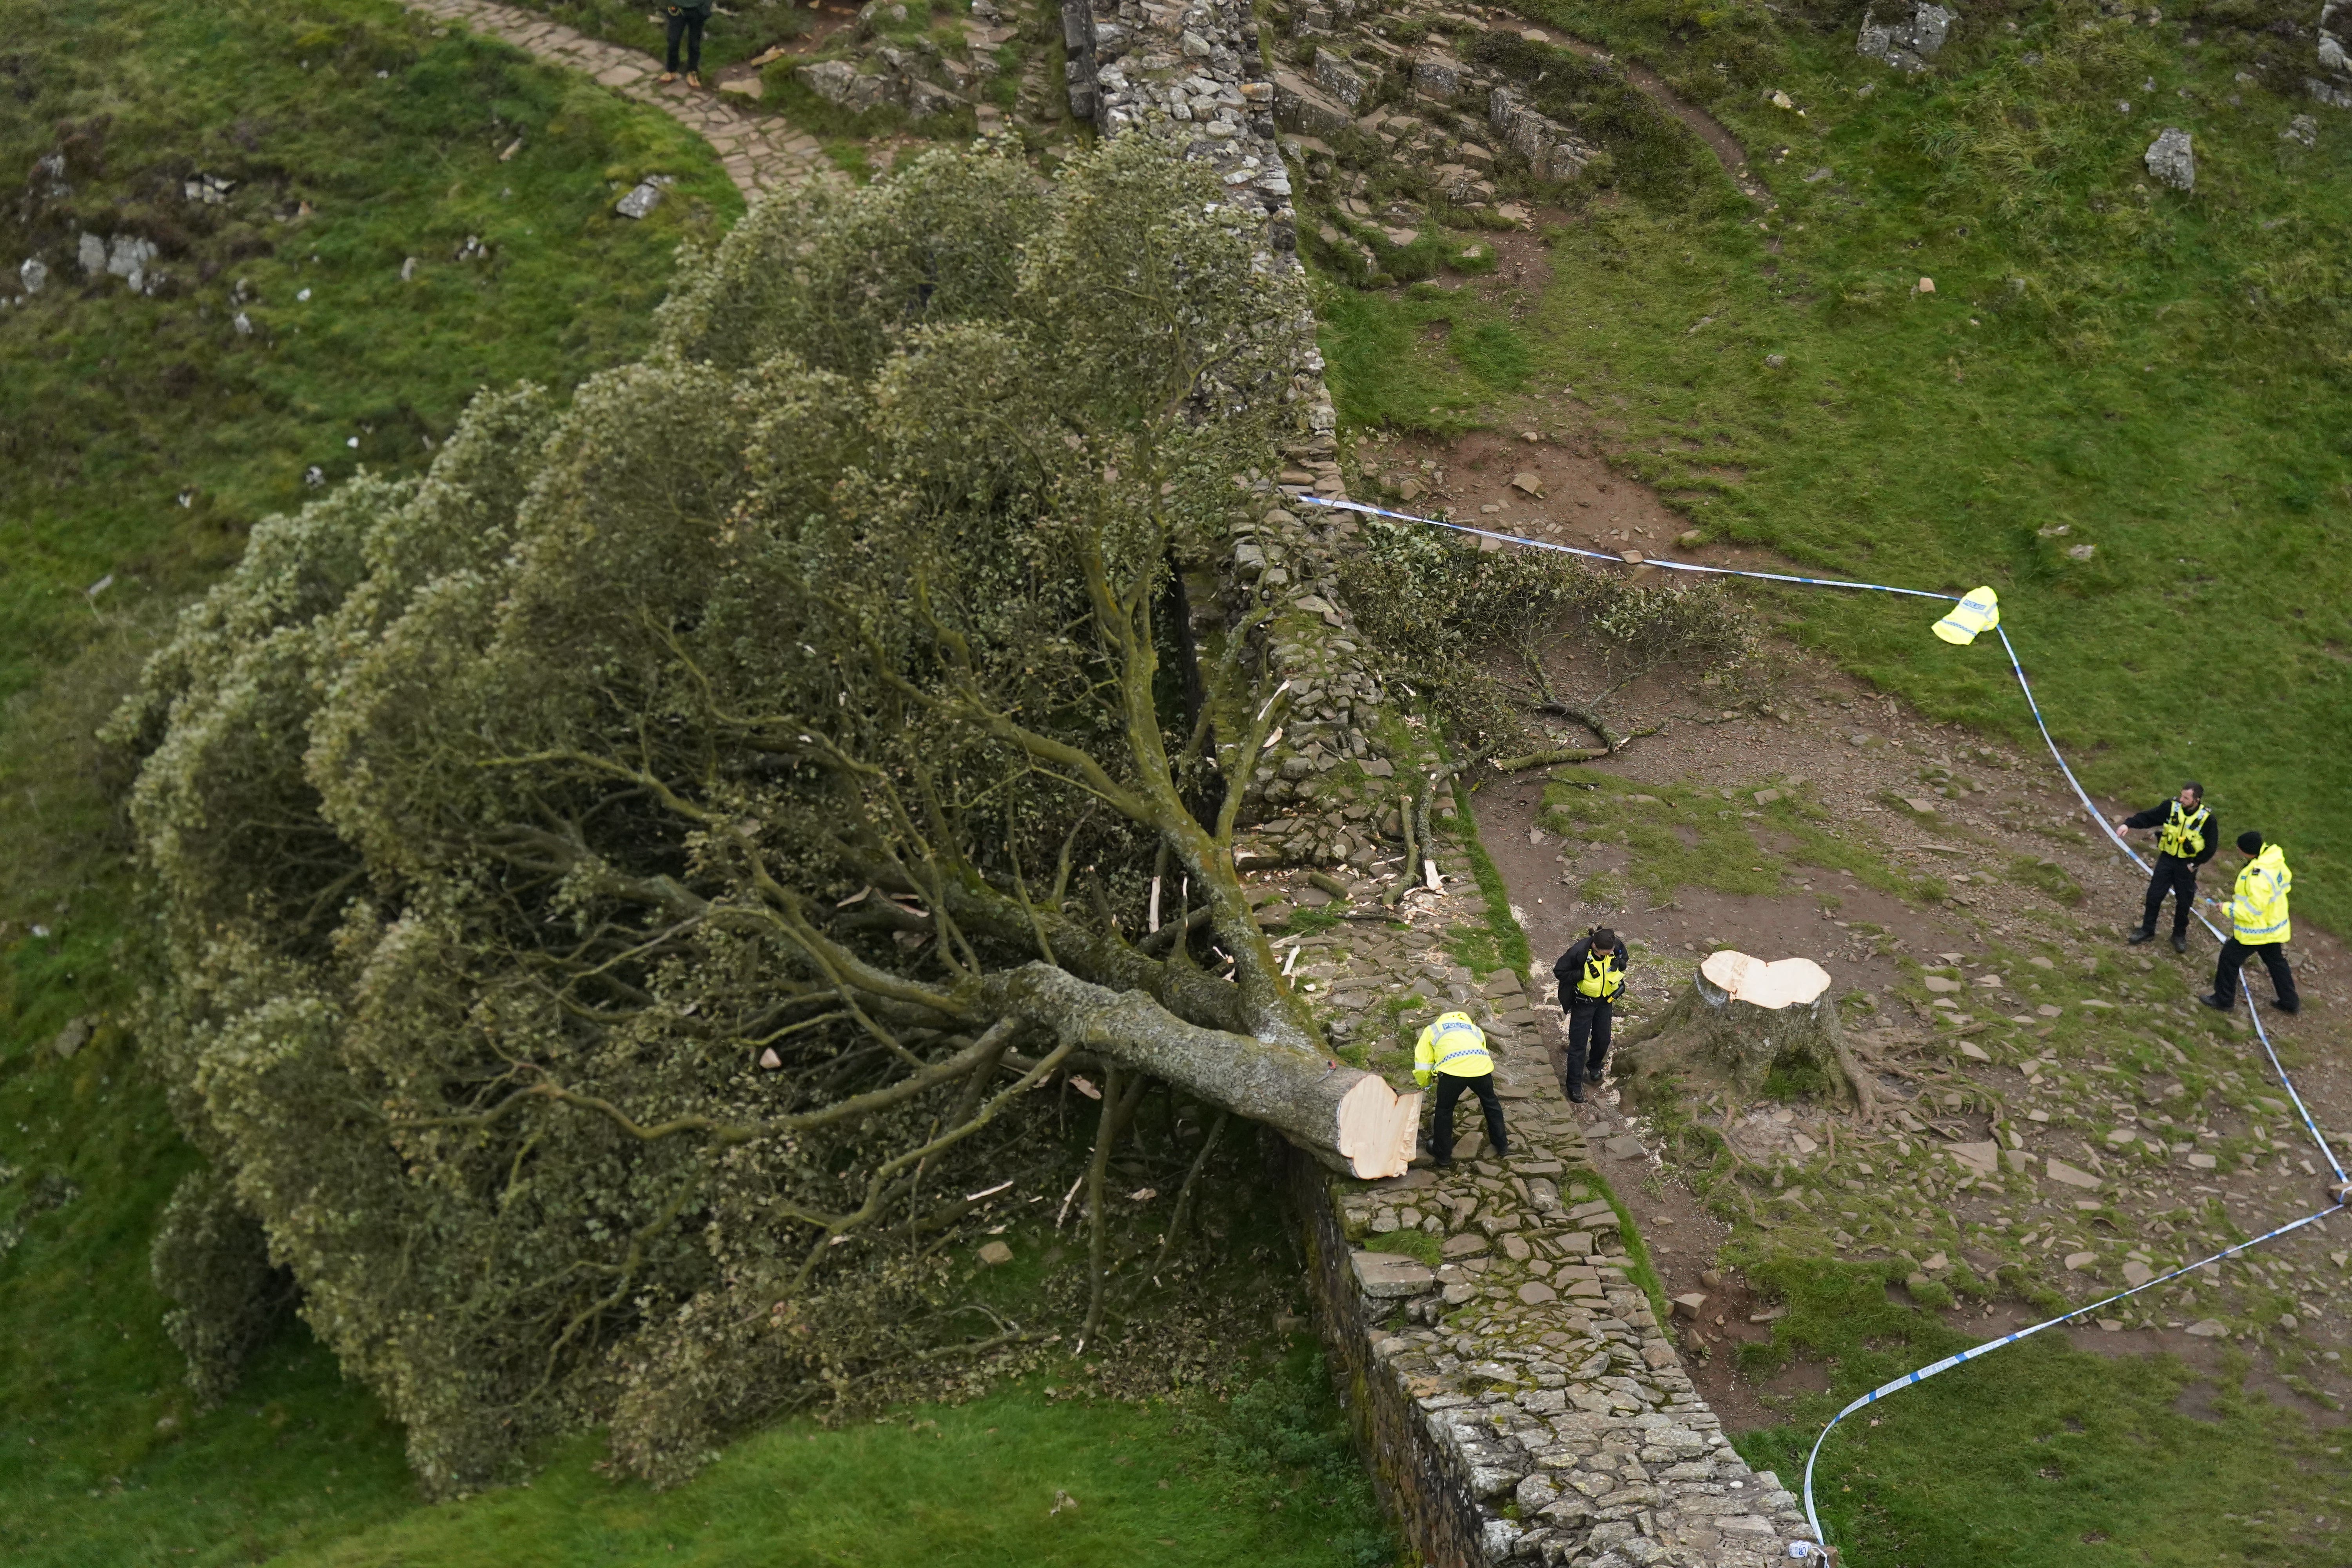 Police officers look at the felled tree at Sycamore Gap, next to Hadrian’s Wall, in Northumberland